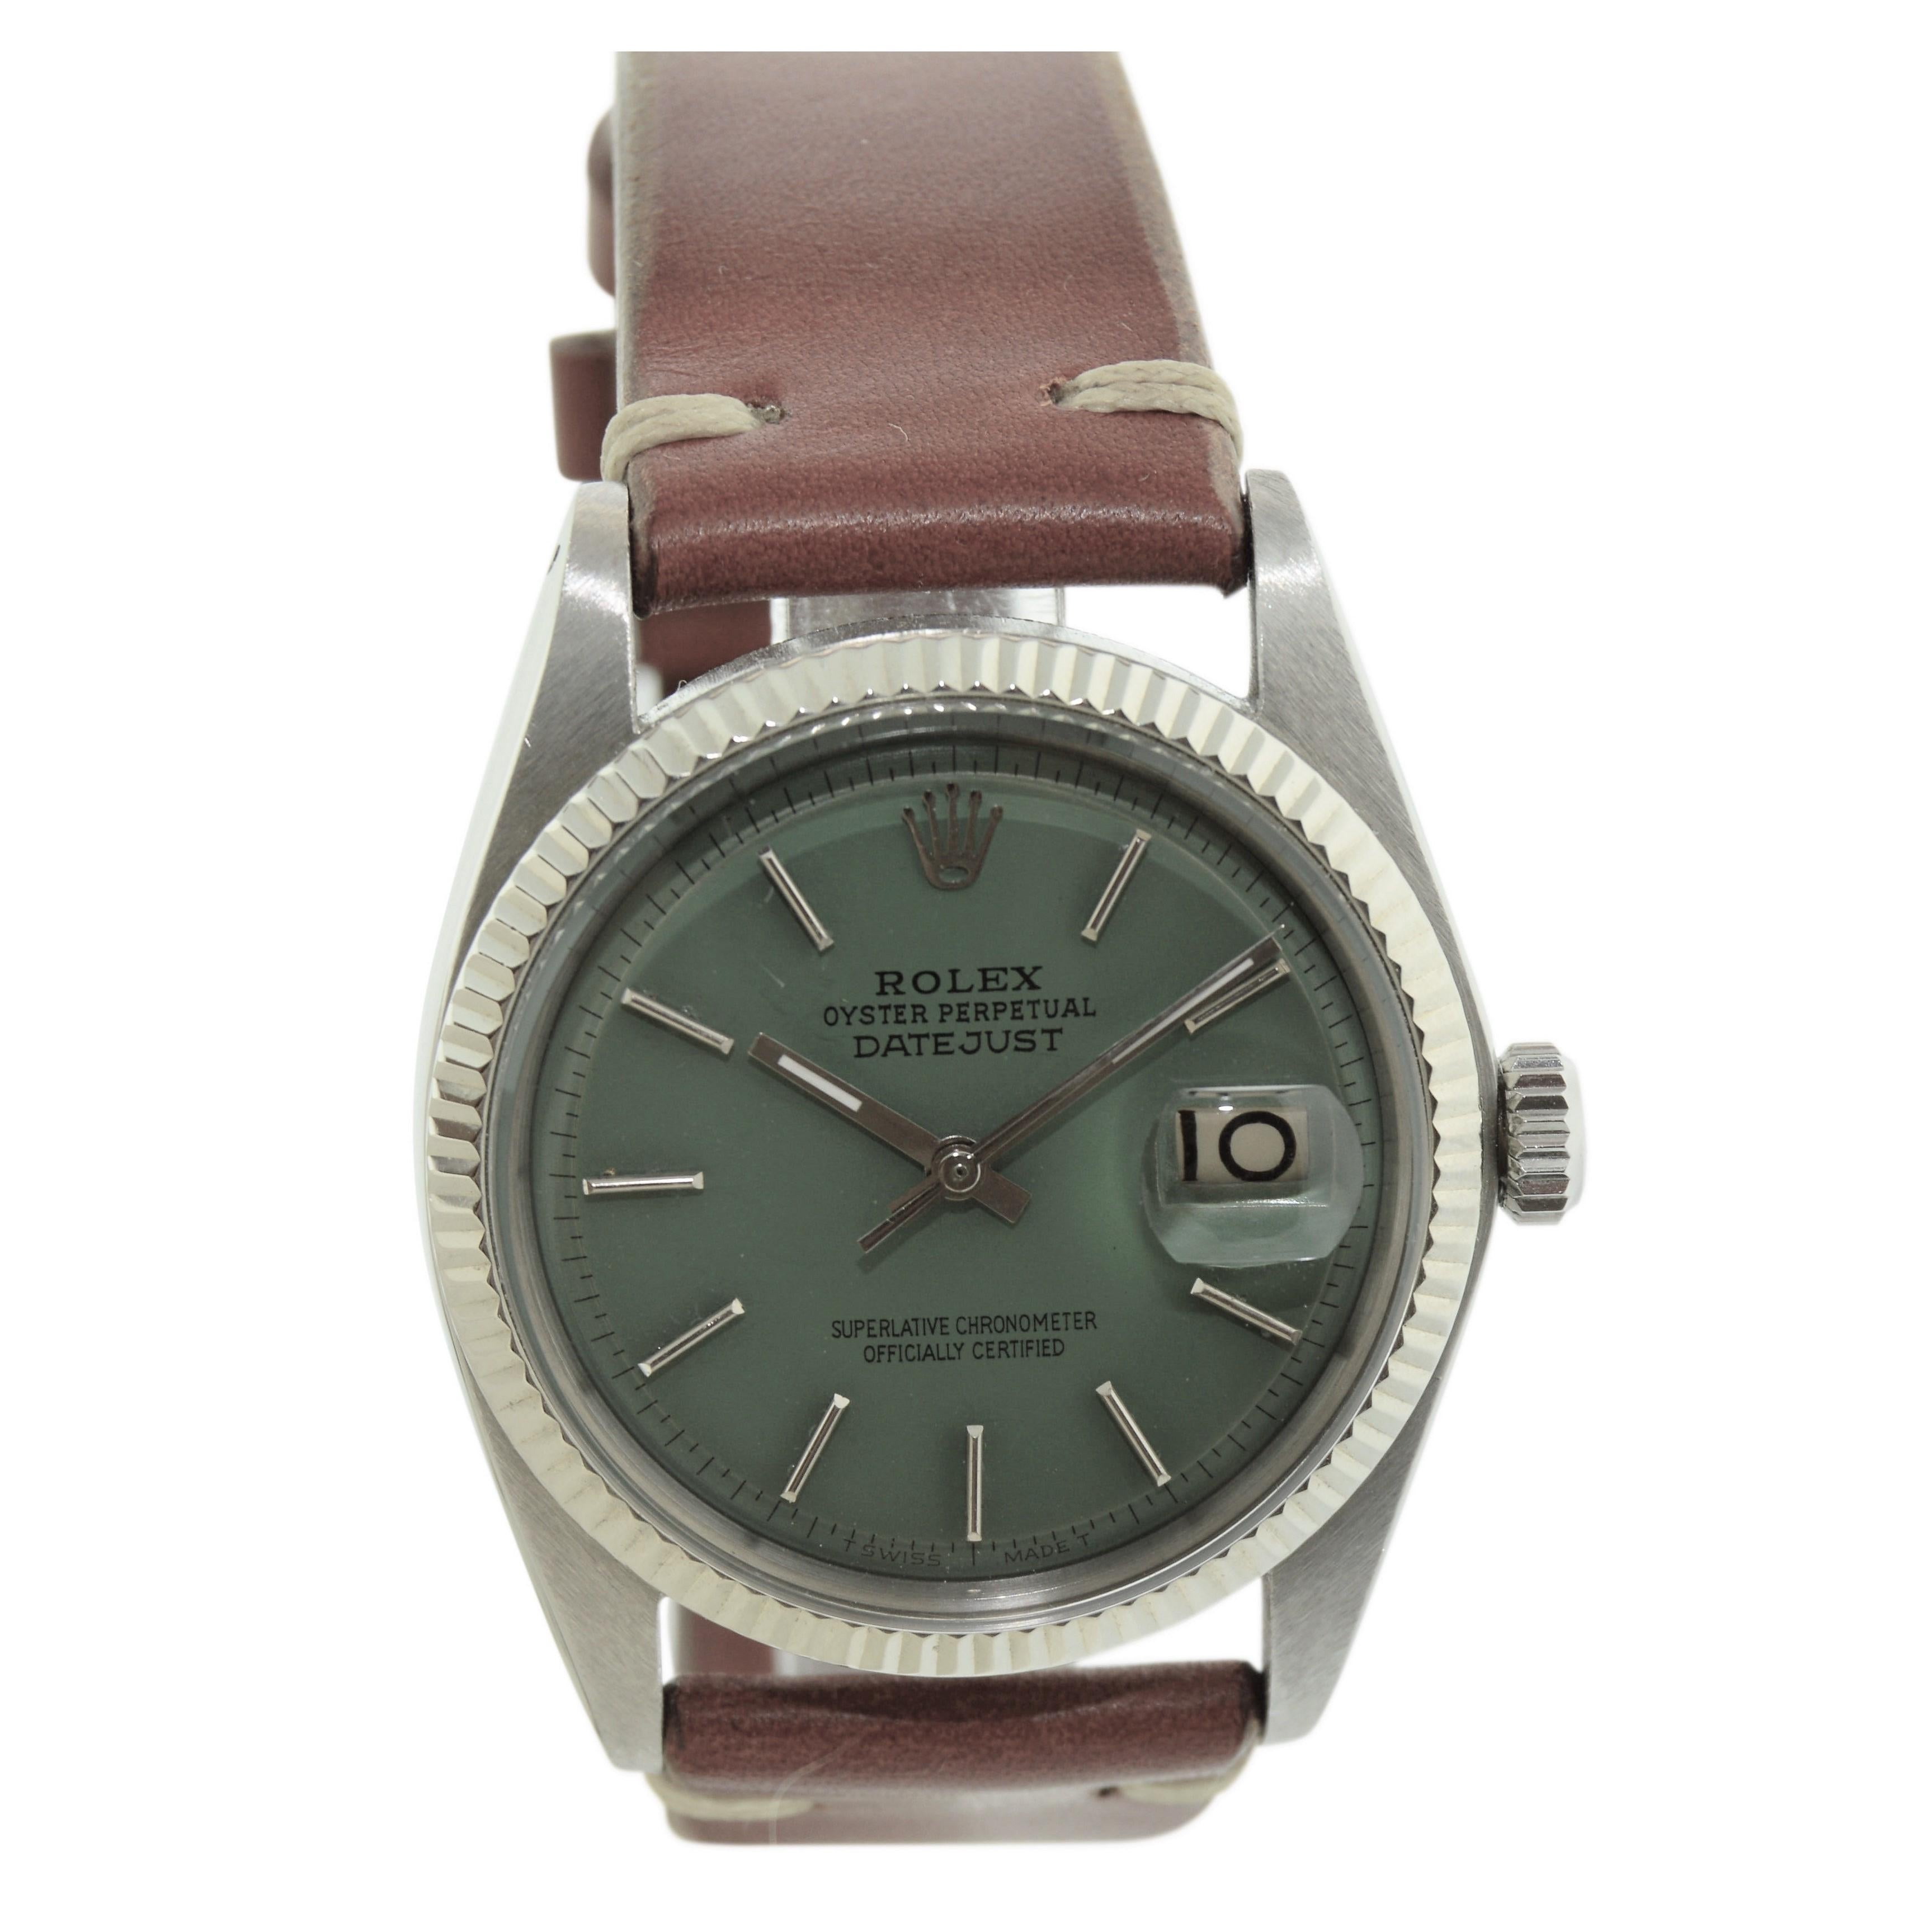 FACTORY / HOUSE: Rolex Watch Company
STYLE / REFERENCE: Datejust / 1601
METAL / MATERIAL: Stainless Steel w/ White Gold Bezel
DIMENSIONS:  42mm  X  34mm
CIRCA: 1962 / 63
MOVEMENT / CALIBER: Perpetual Winding / 26 Jewels / Cal. 1570
DIAL / HANDS: